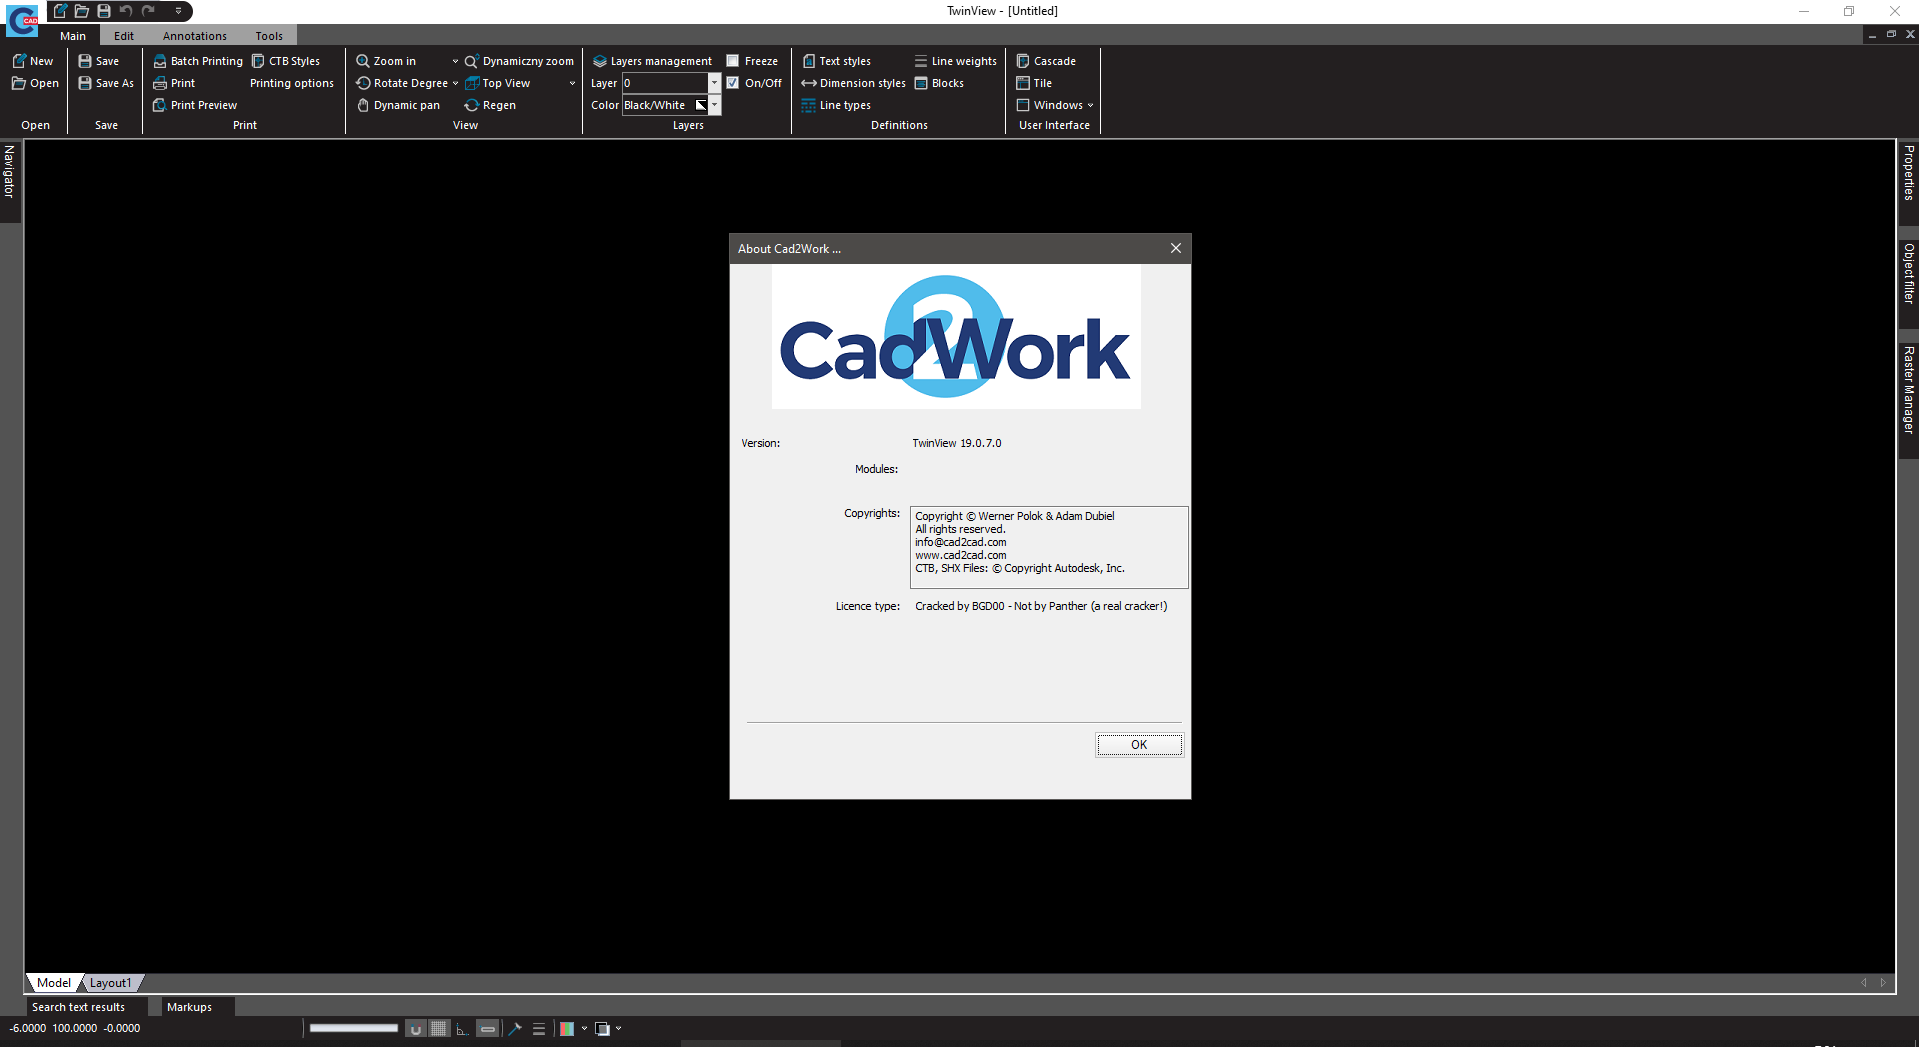 Working with Cadwork Twinview 19.0.7.0 full license